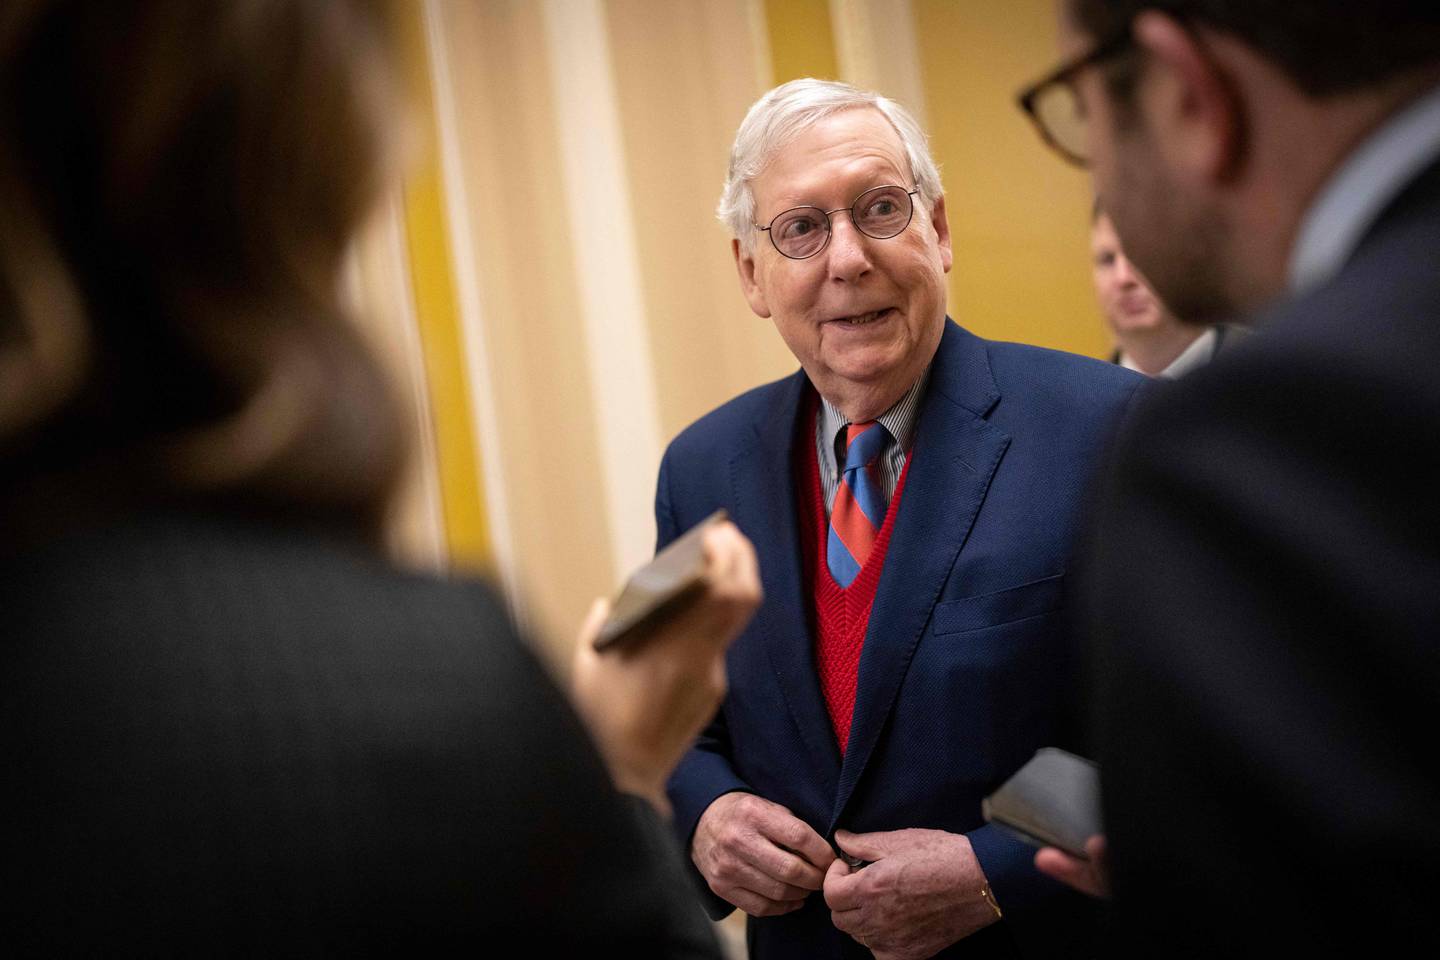 Senate minority leader Mitch McConnell said Donald Trump's political clout had diminished. AFP